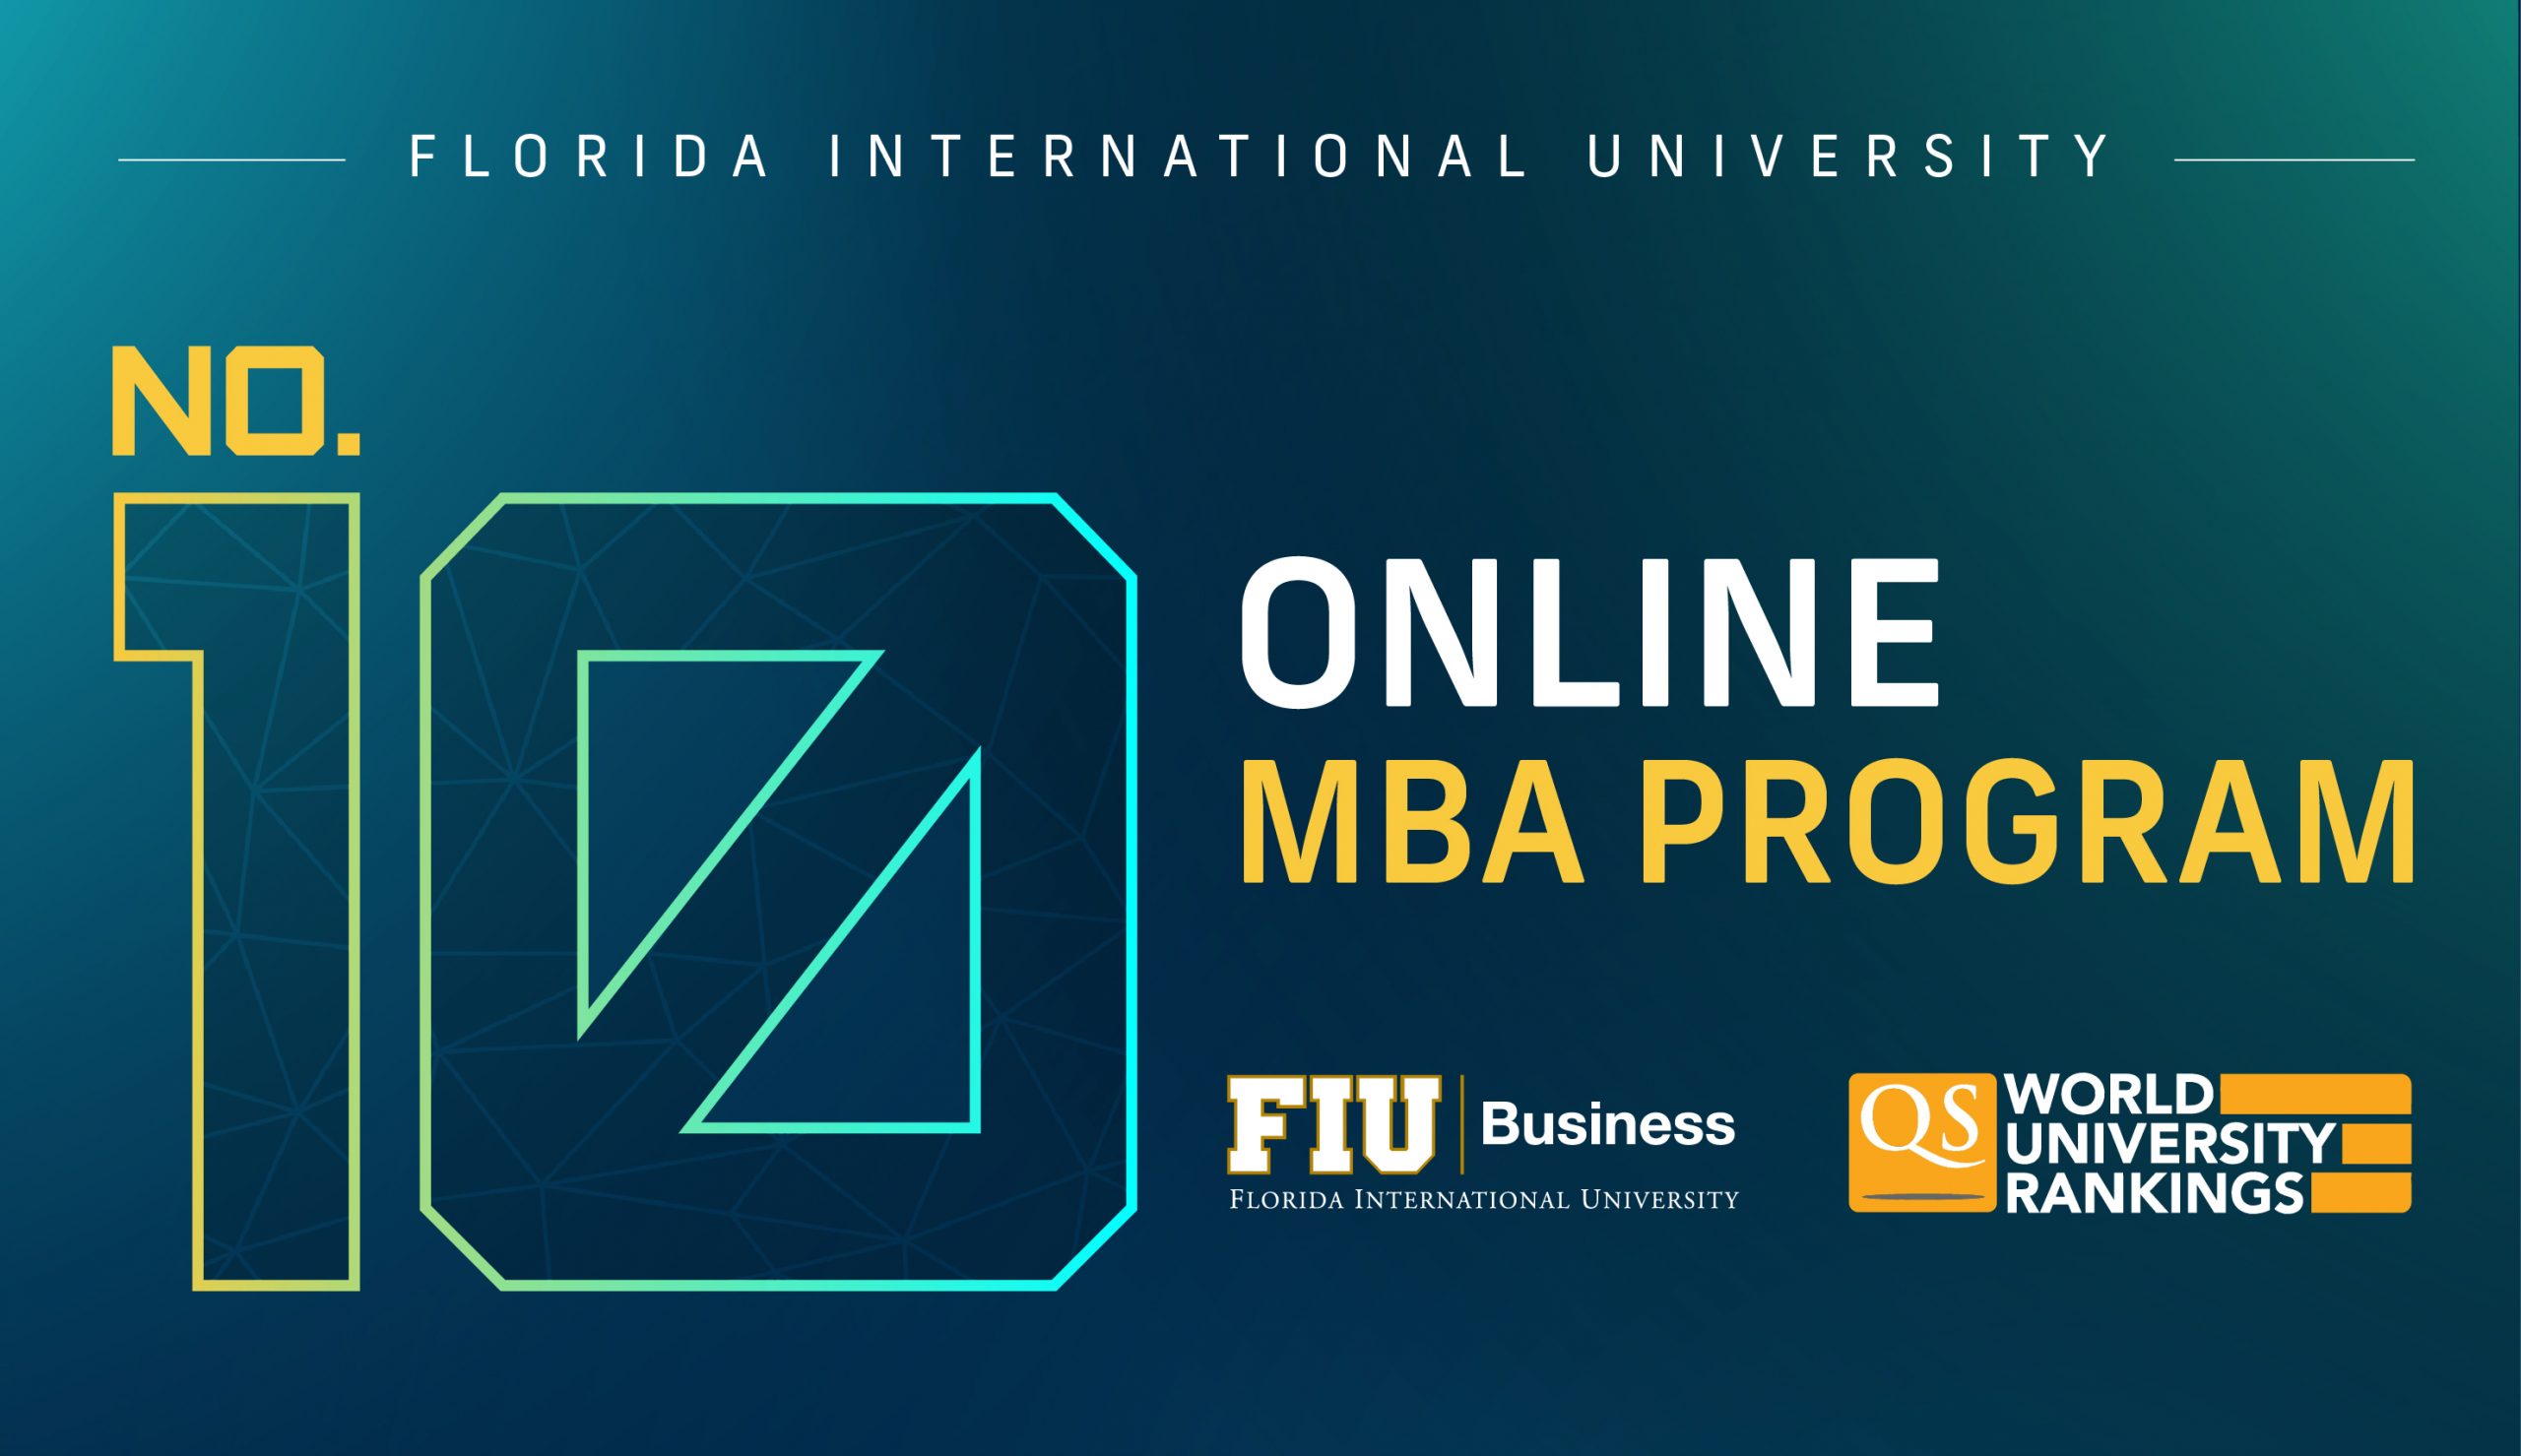 FIU Business Online MBA Program Ranked No. 10 in the World